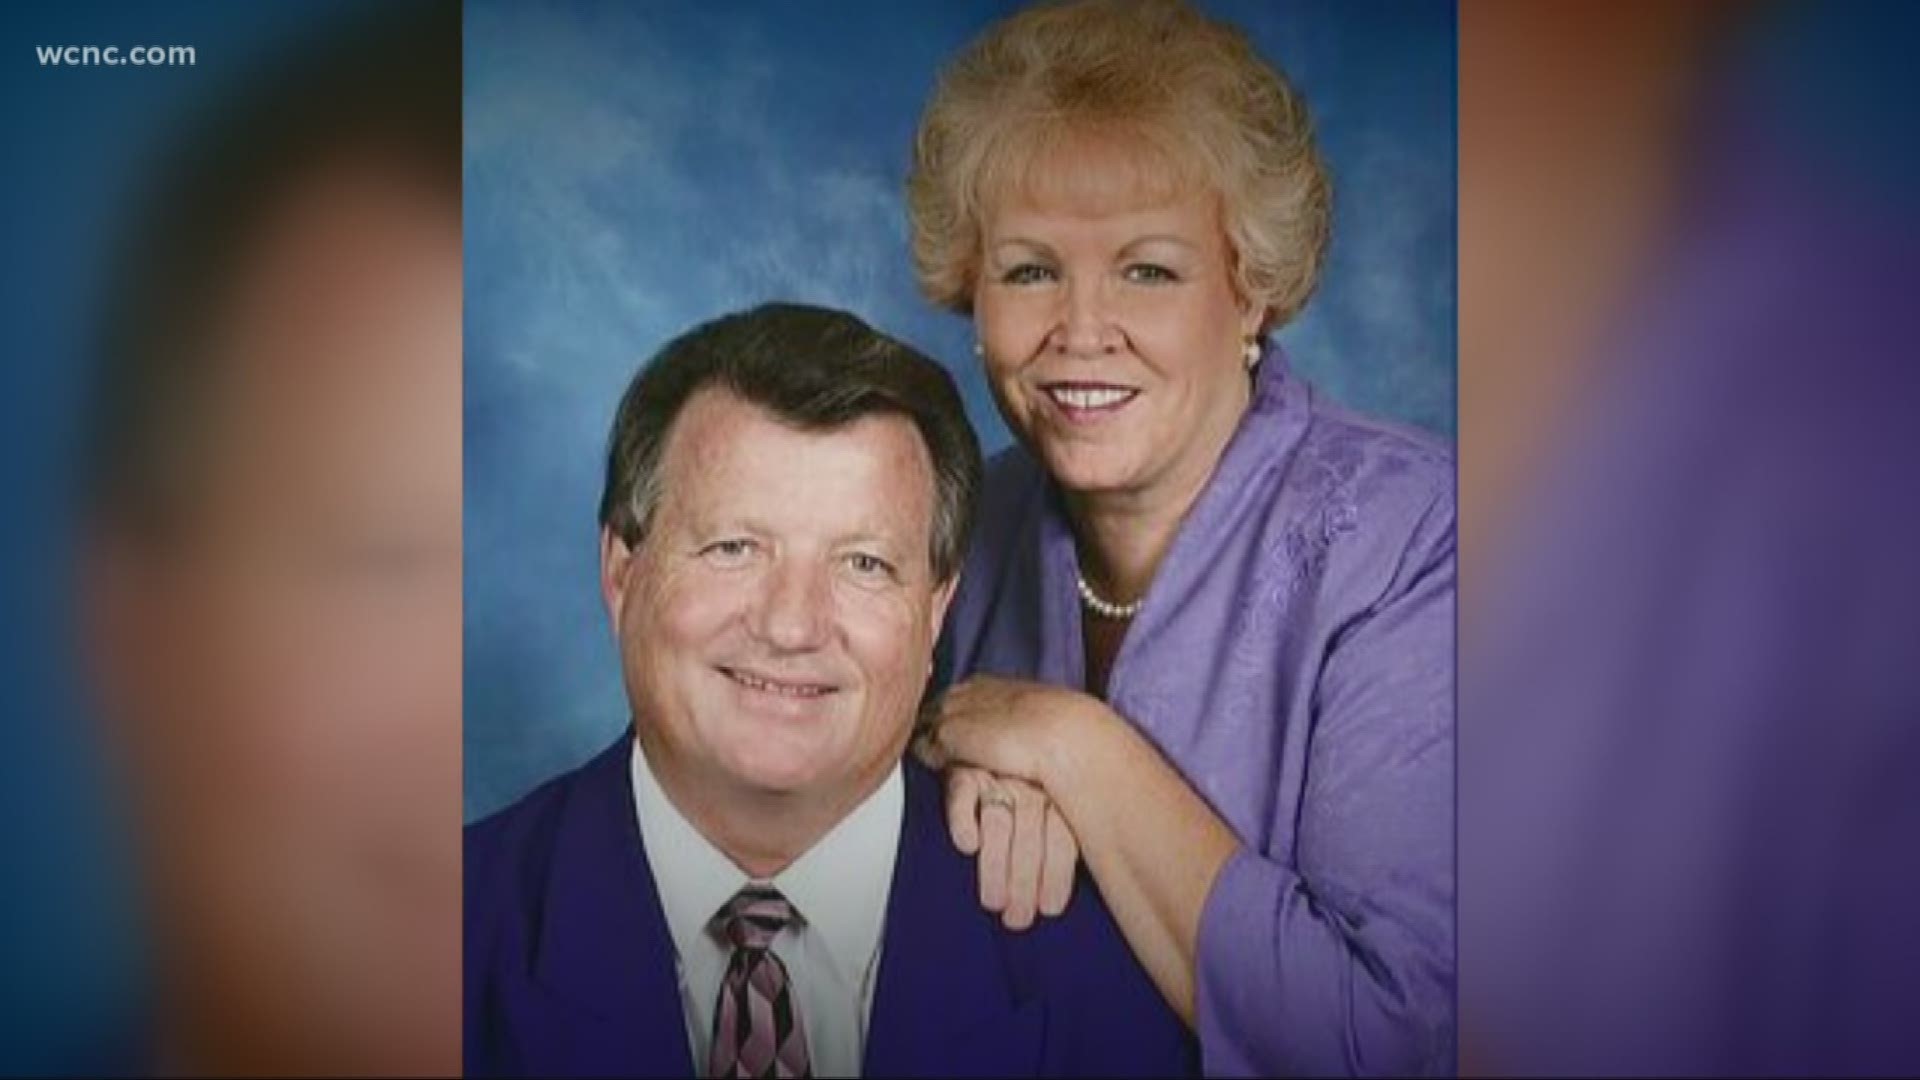 Officials say a fire broke out early Tuesday morning, sending both Burch and his wife Barbara to the hospital.